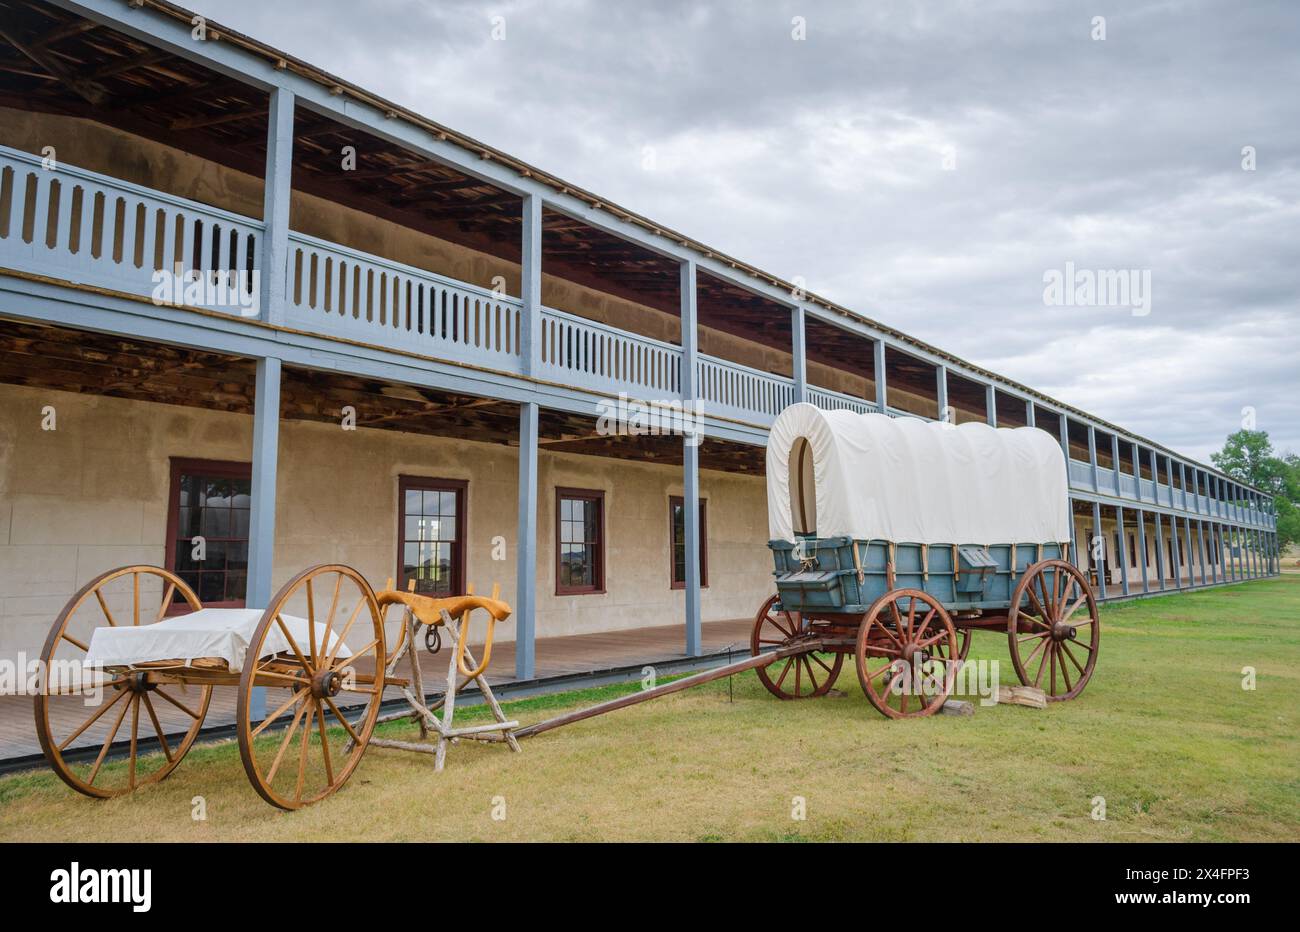 The old cavalry barracks at Fort Laramie National Historic Site, Trading Post, Diplomatic Site, and Military Installation in Wyoming, USA Stock Photo